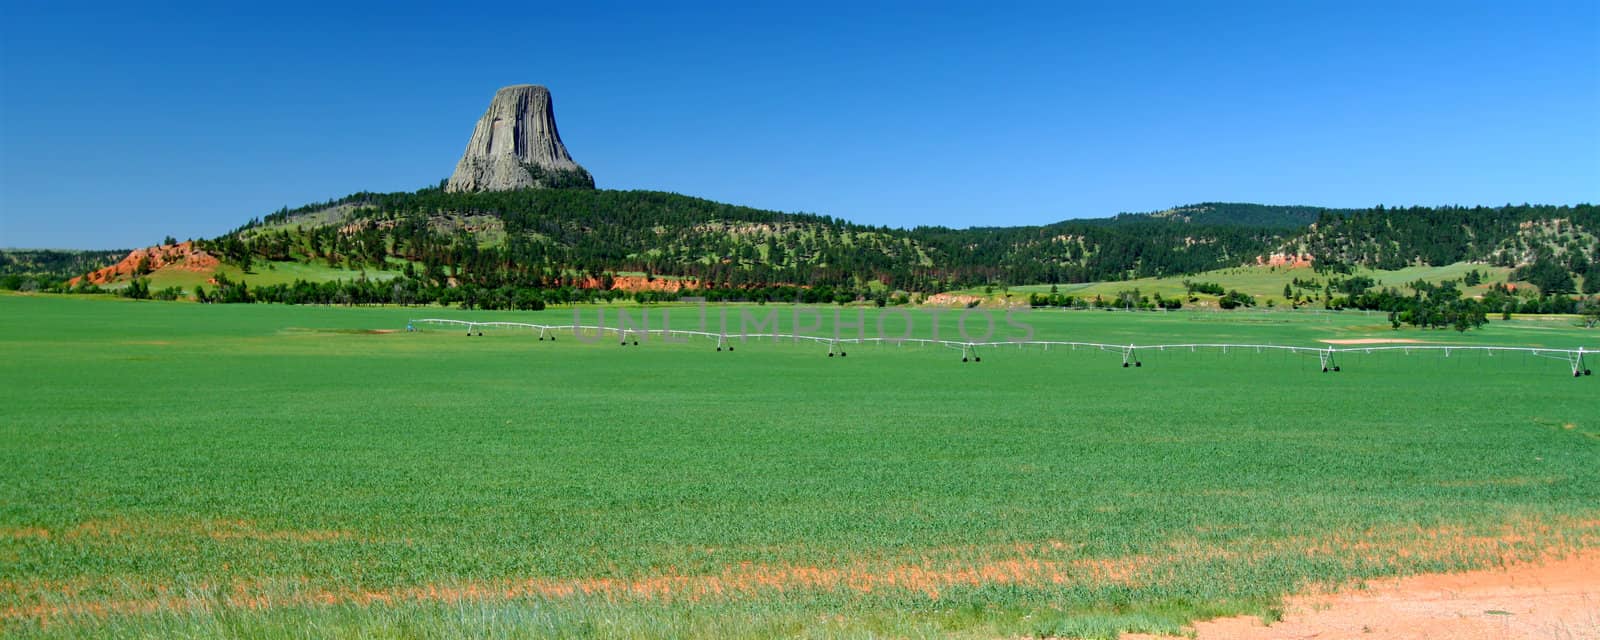 Devils Tower in northeast Wyoming by Wirepec